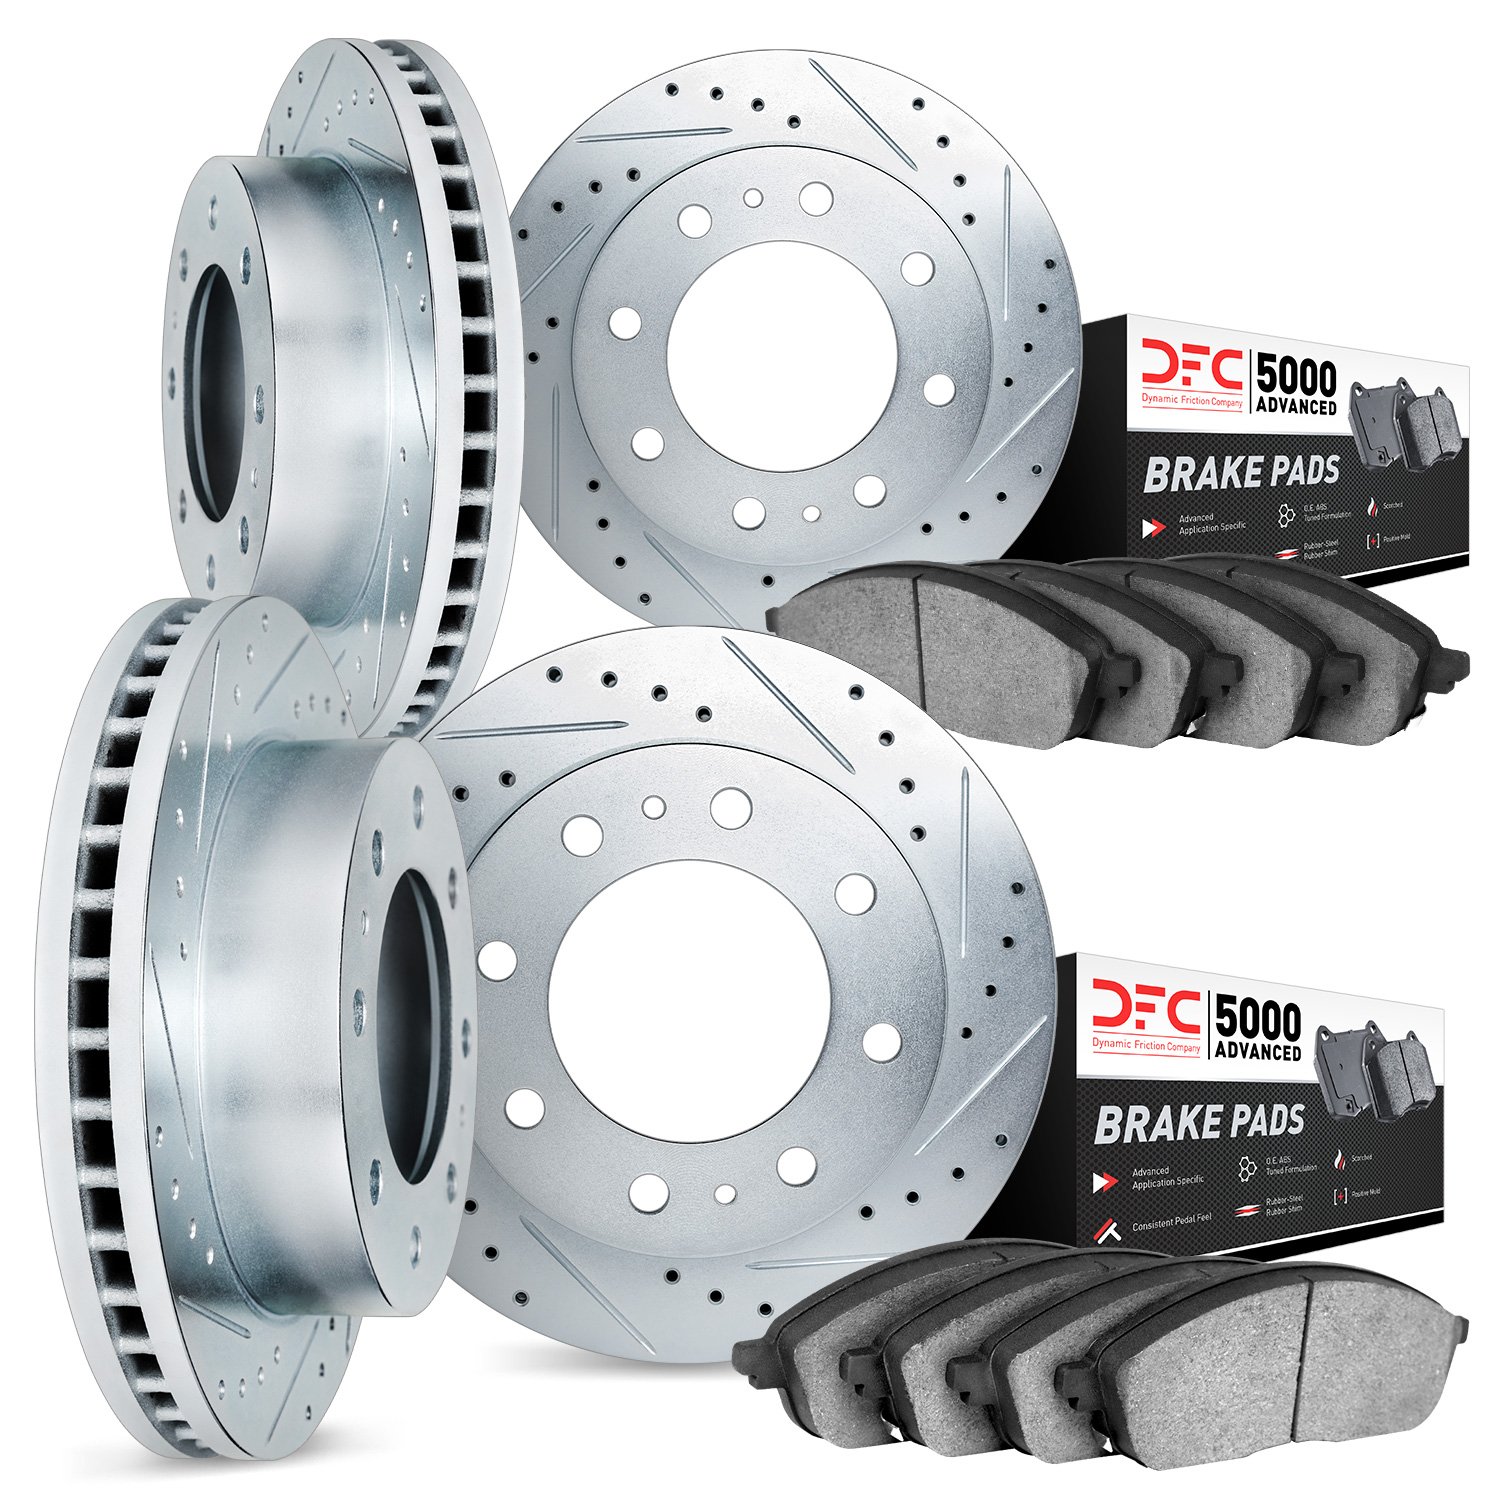 7504-40247 Drilled/Slotted Brake Rotors w/5000 Advanced Brake Pads Kit [Silver], 2009-2018 Mopar, Position: Front and Rear